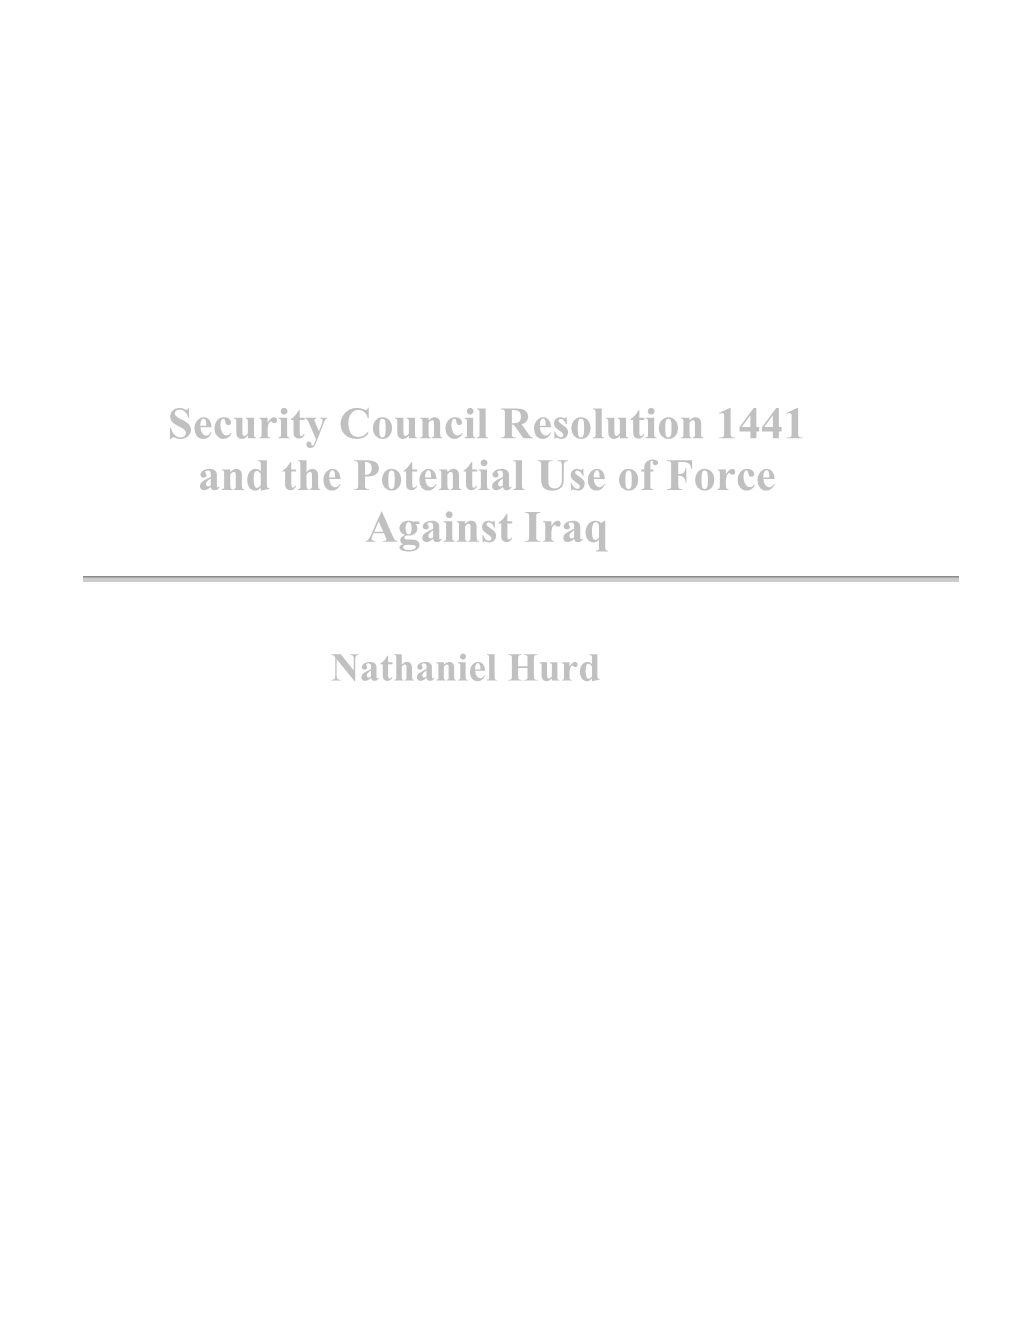 Title: Security Council Resolution (SCR) 1441 (8 November 2002): Select Questions and Answers